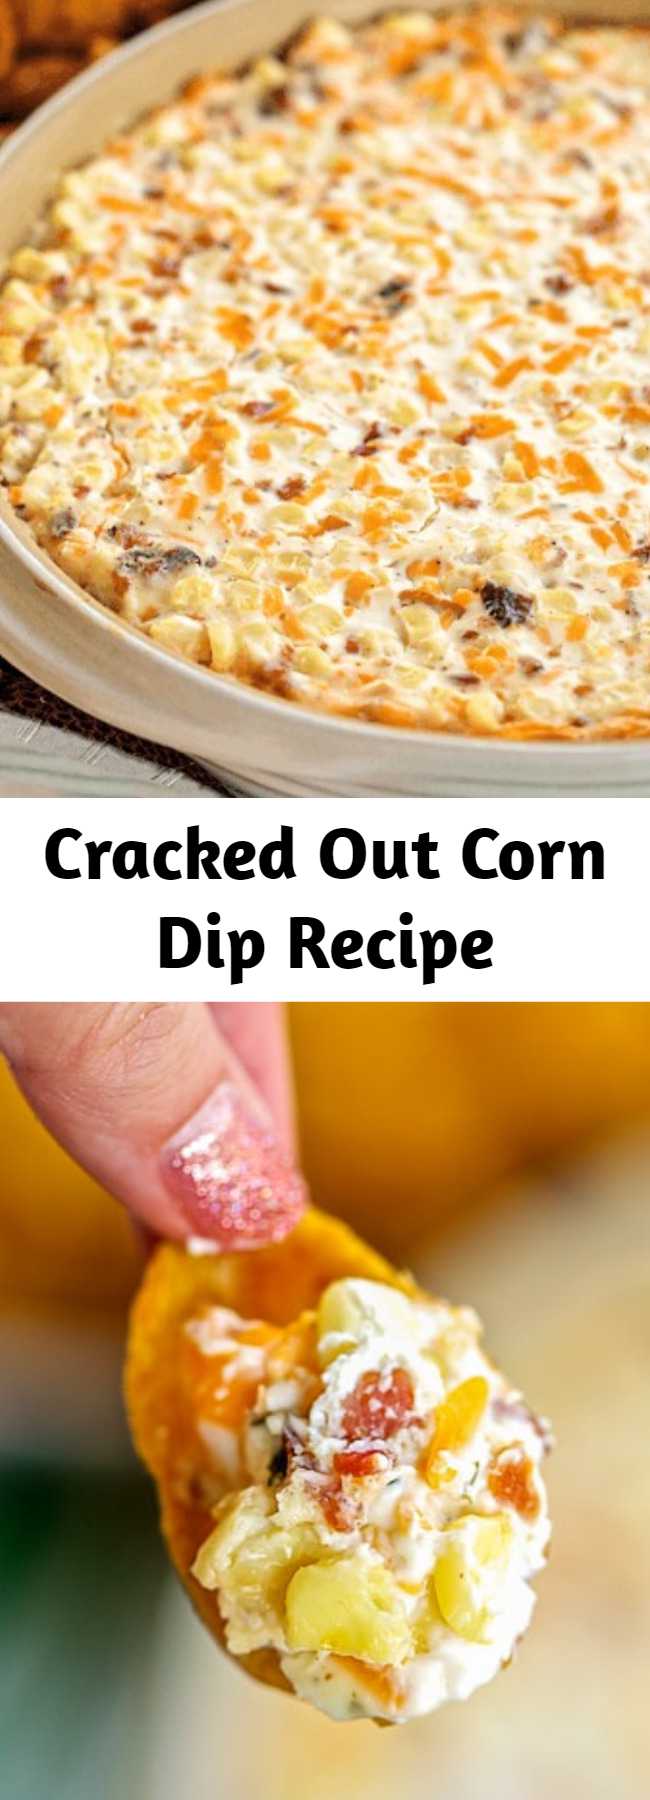 Cracked Out Corn Dip Recipe - Corn, cream cheese, sour cream, cheddar, bacon and Ranch. I took this to a party and it was the first thing to go! Can make ahead and refrigerate until ready to eat. Our FAVORITE dip! YUM #dip #appetizer #partyfood #corn #bacon #ranch